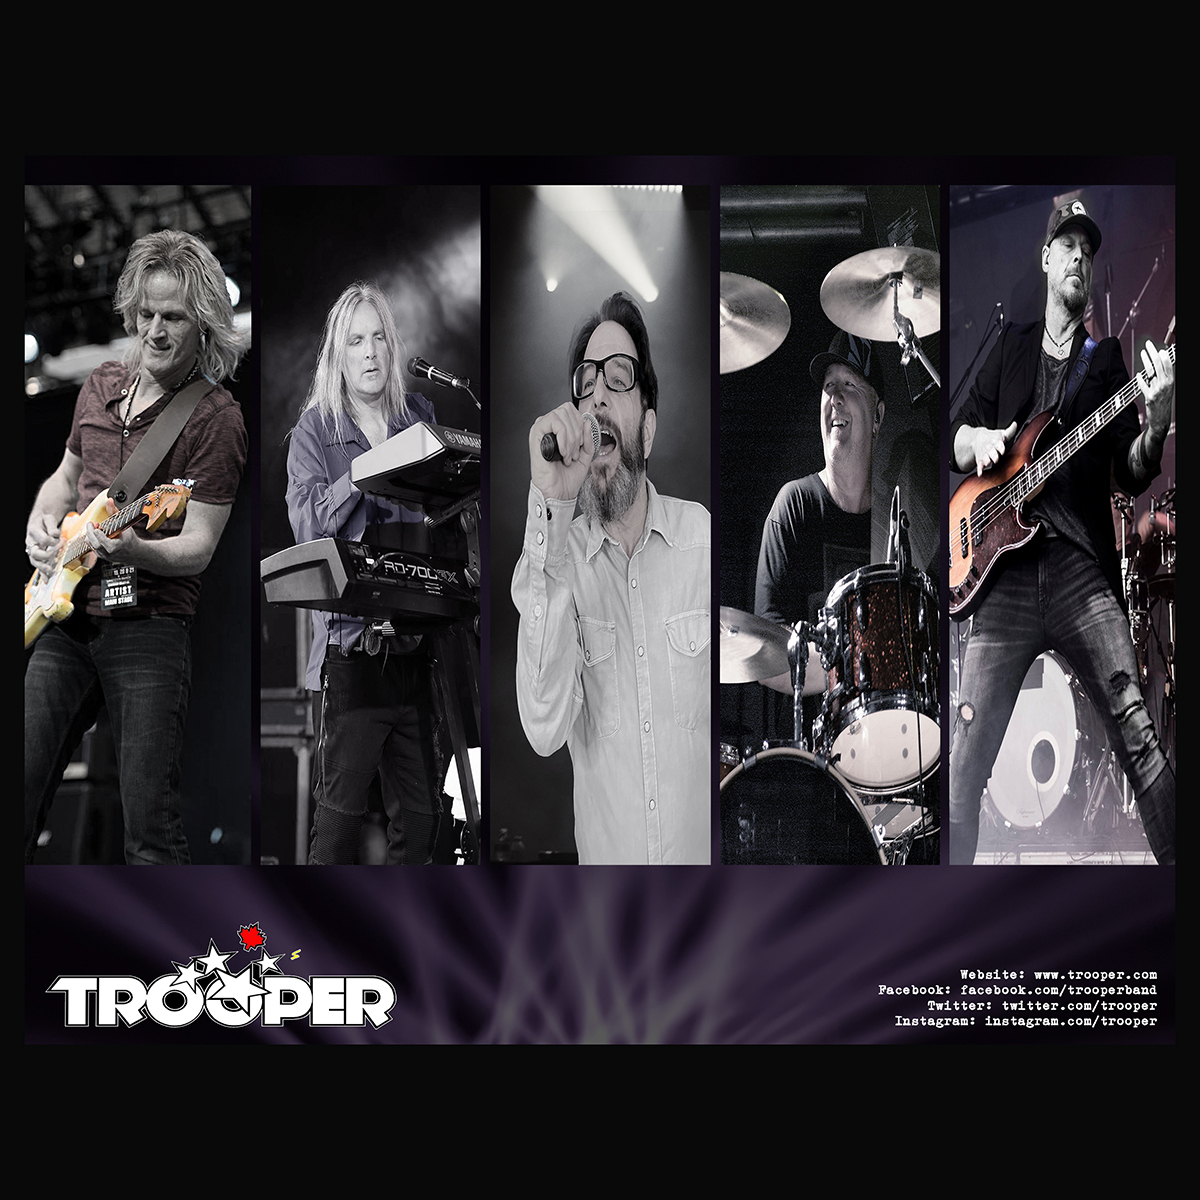 Trooper - The new lineup